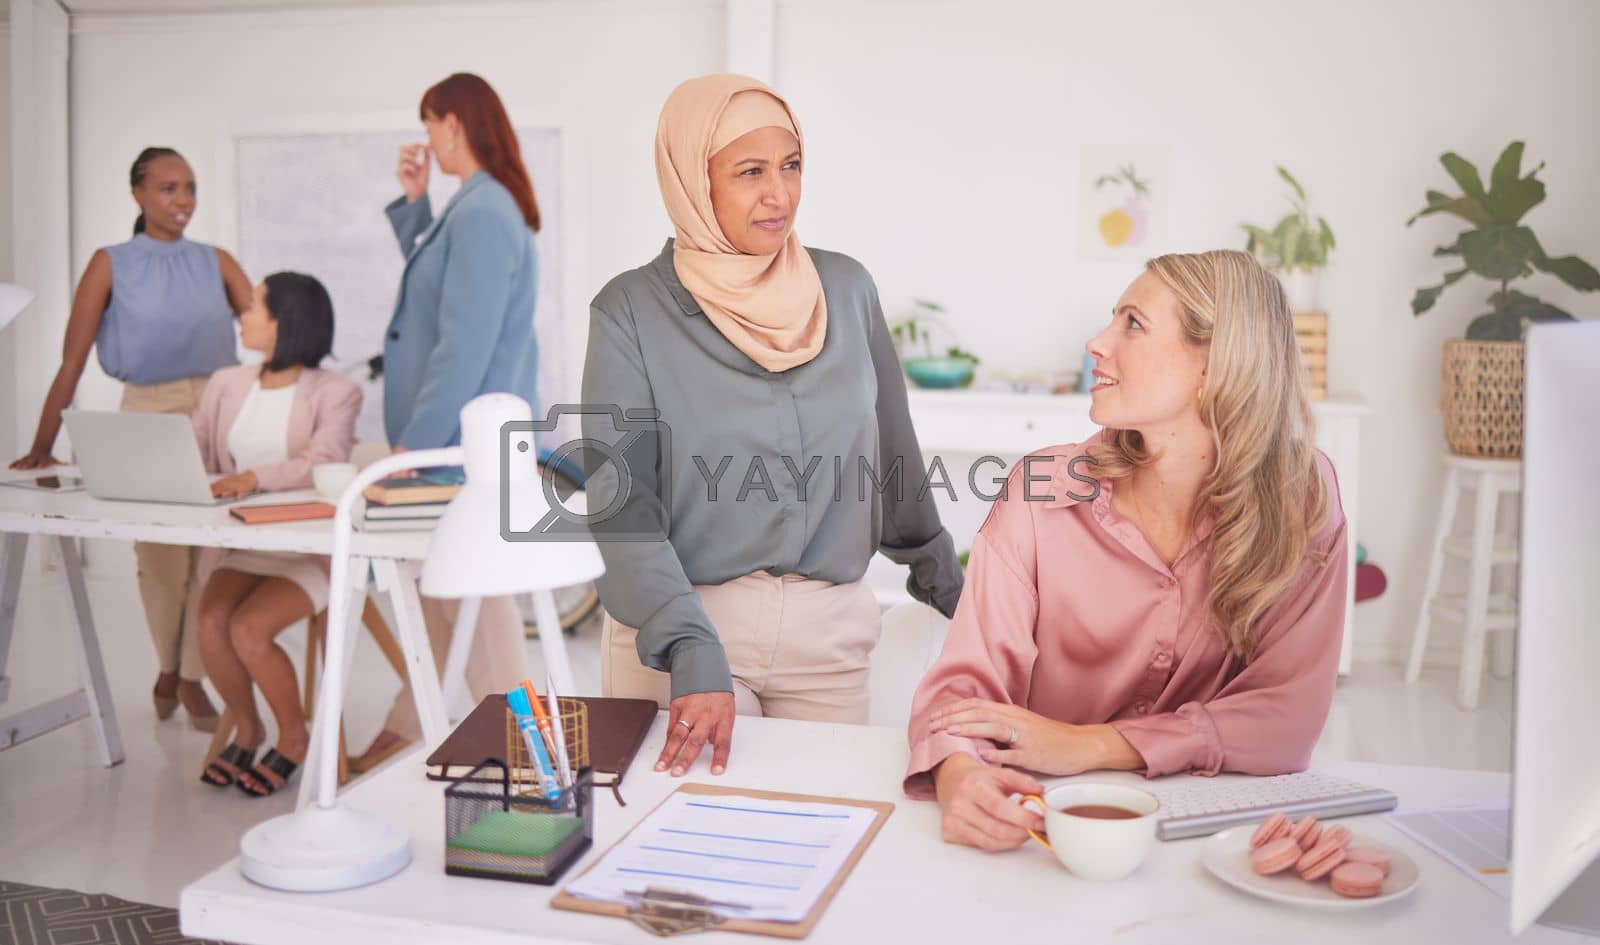 Business people, women and communication at desk in office, chatting or speaking. Thinking, meeting and ceo, leader or manager talking with employee or coworker on coffee break at company workplace